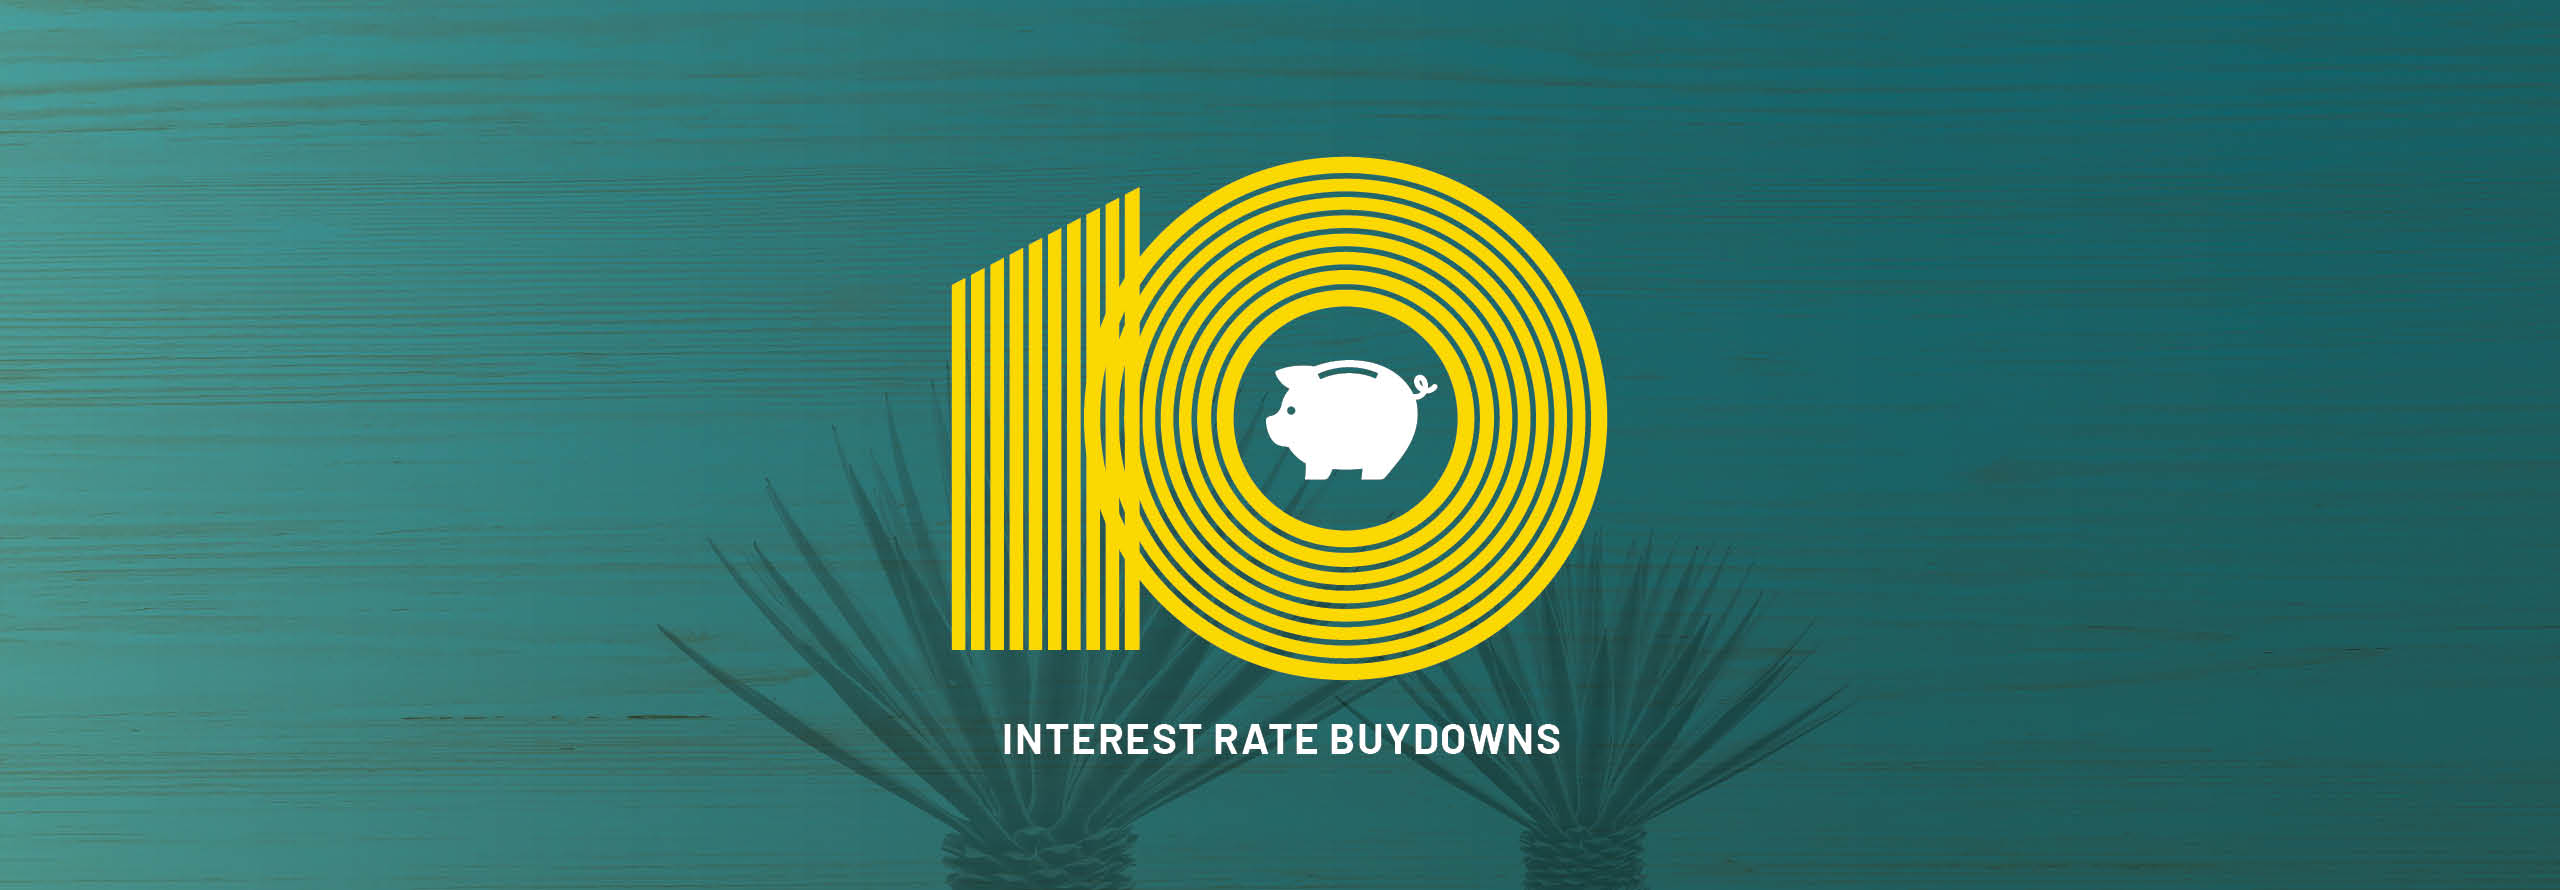 Interest Rate Buydowns Image